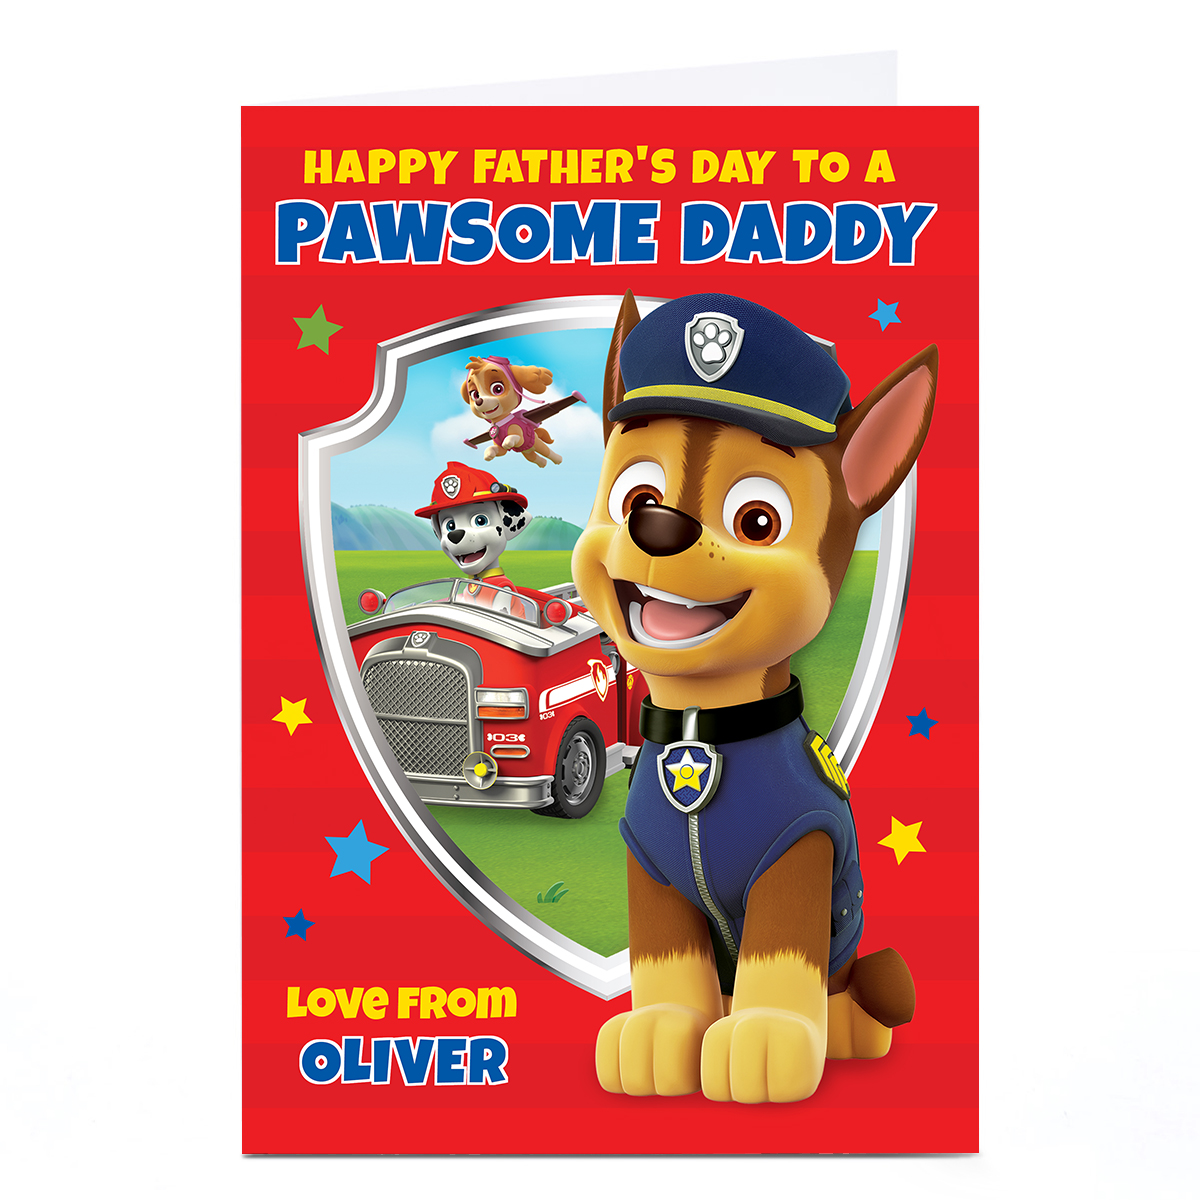 Buy Personalised Paw Patrol Father s Day Card Pawsome Daddy For GBP 2